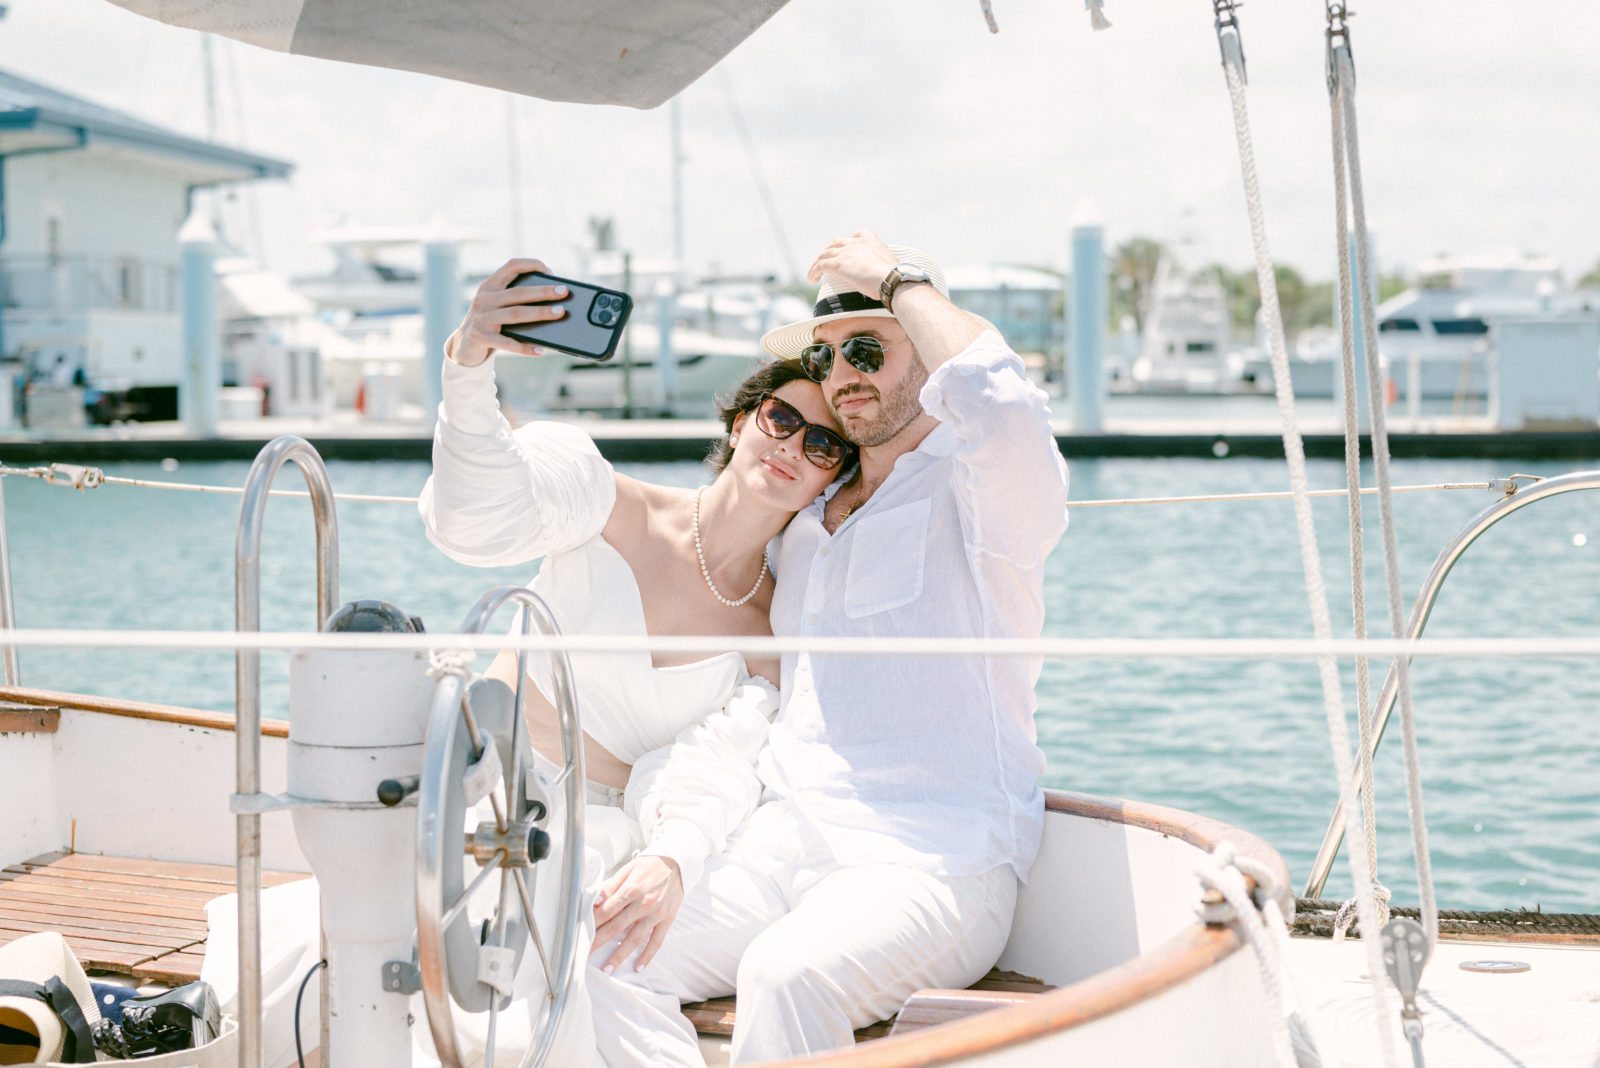 Newly wed couple taking a selfie on a boat